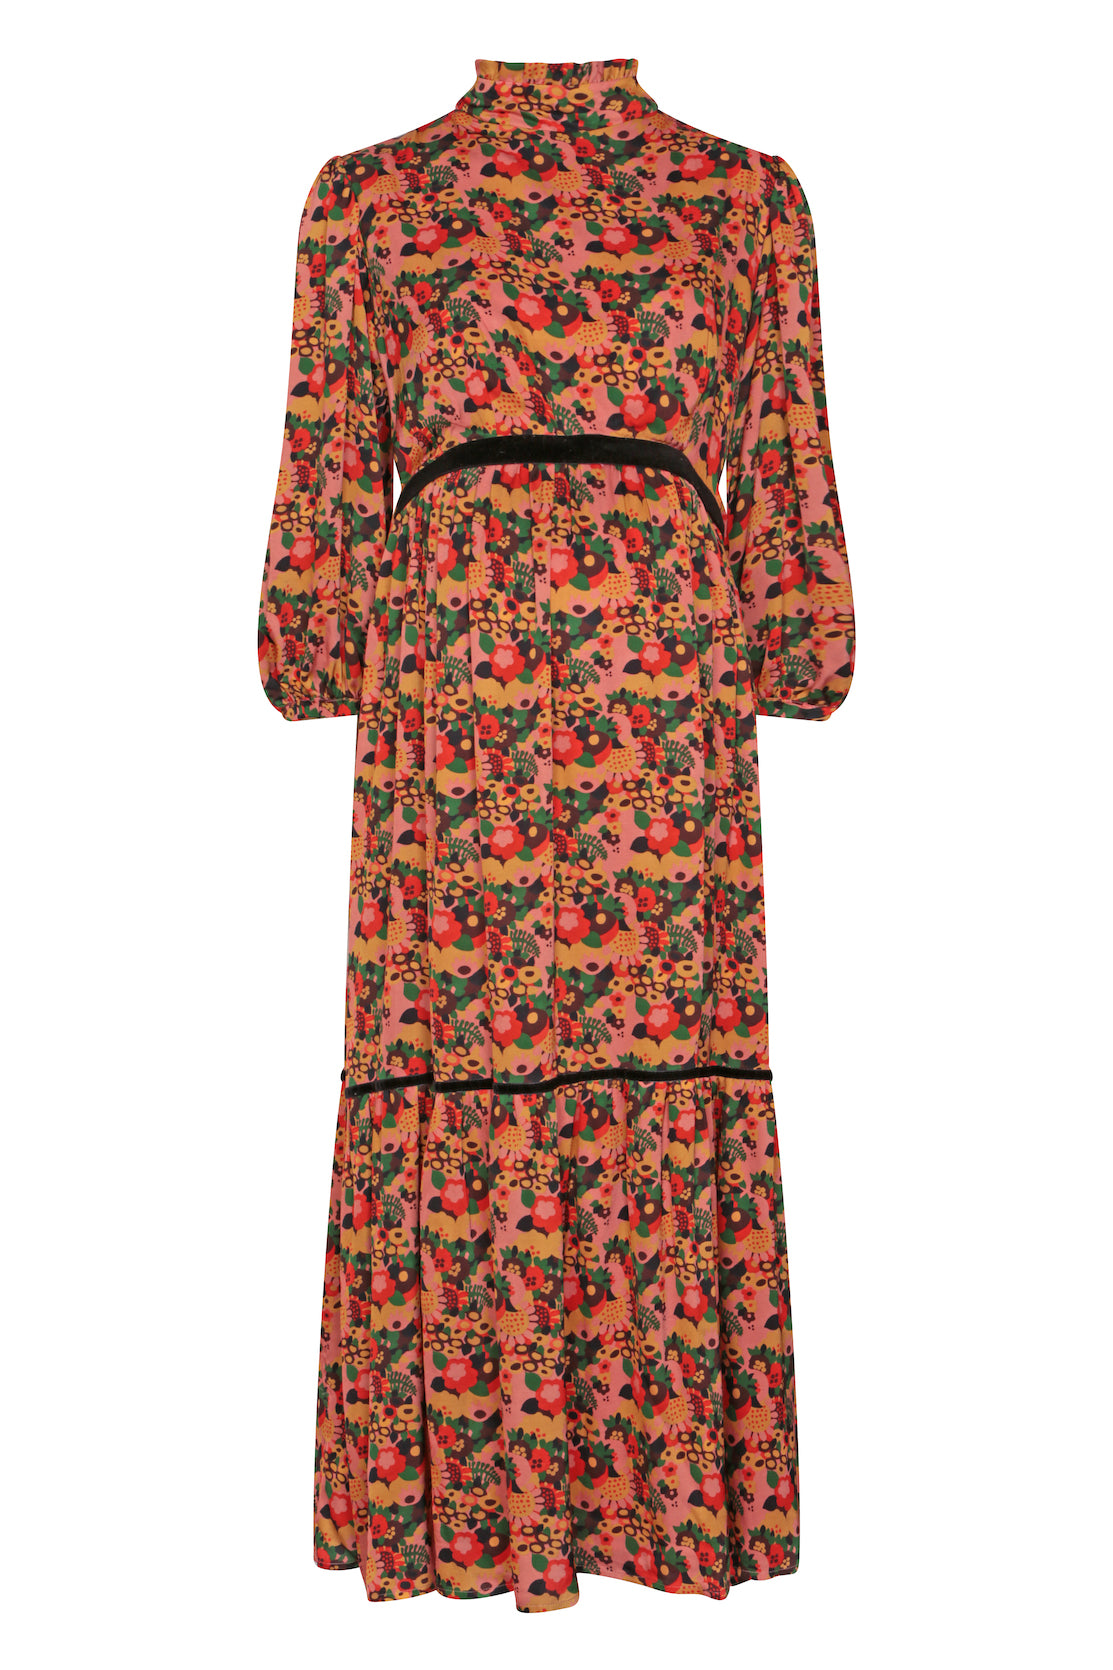 Floral maternity and breastfeeding dress. Stylish maternity occasion wear dress for all stages of motherhood. A Bump-to-Baby long midi dress, designed to flatter every trimester and then with discreet zips for nursing mothers. Vibrant winter tones on a luxuriant sateen fabric, that will take you from day to evening.